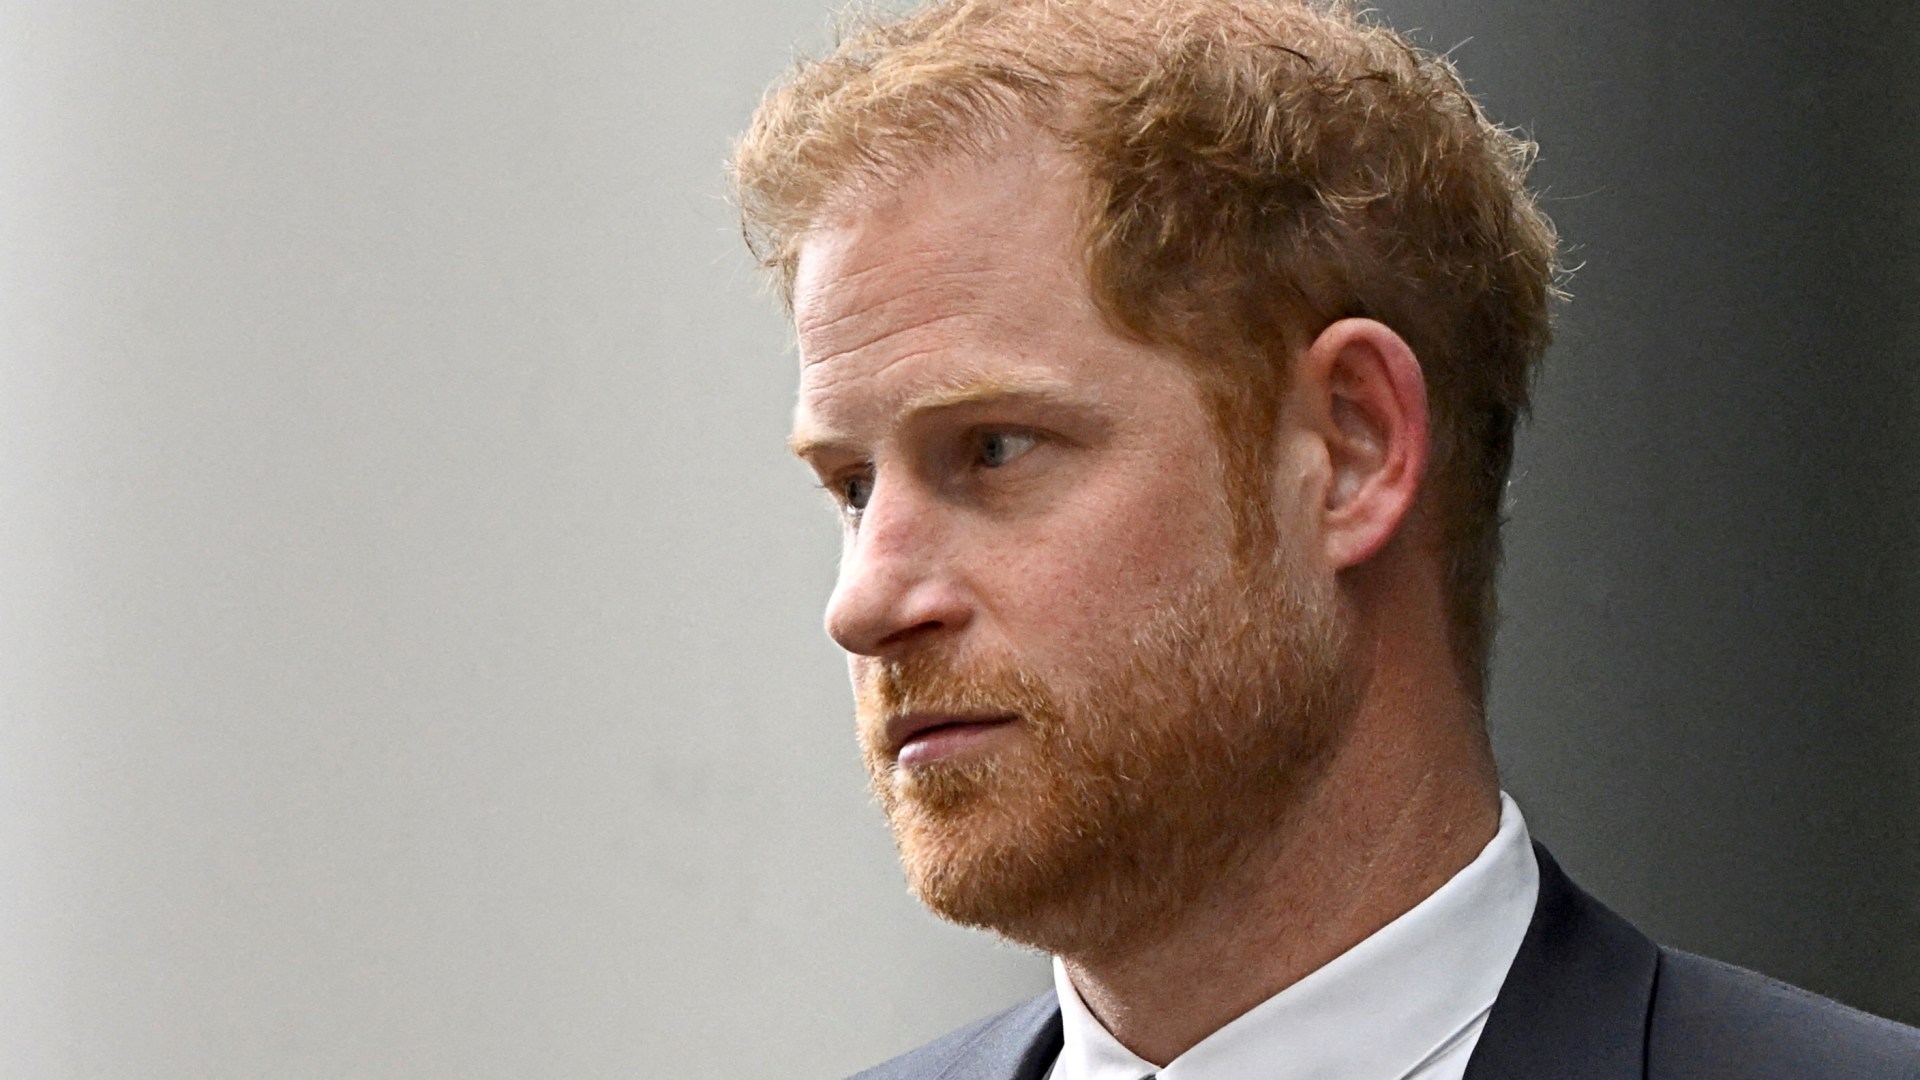 Exclusive: Prince Harry’s US Visa Exposed – Could False Information Lead to Deportation?